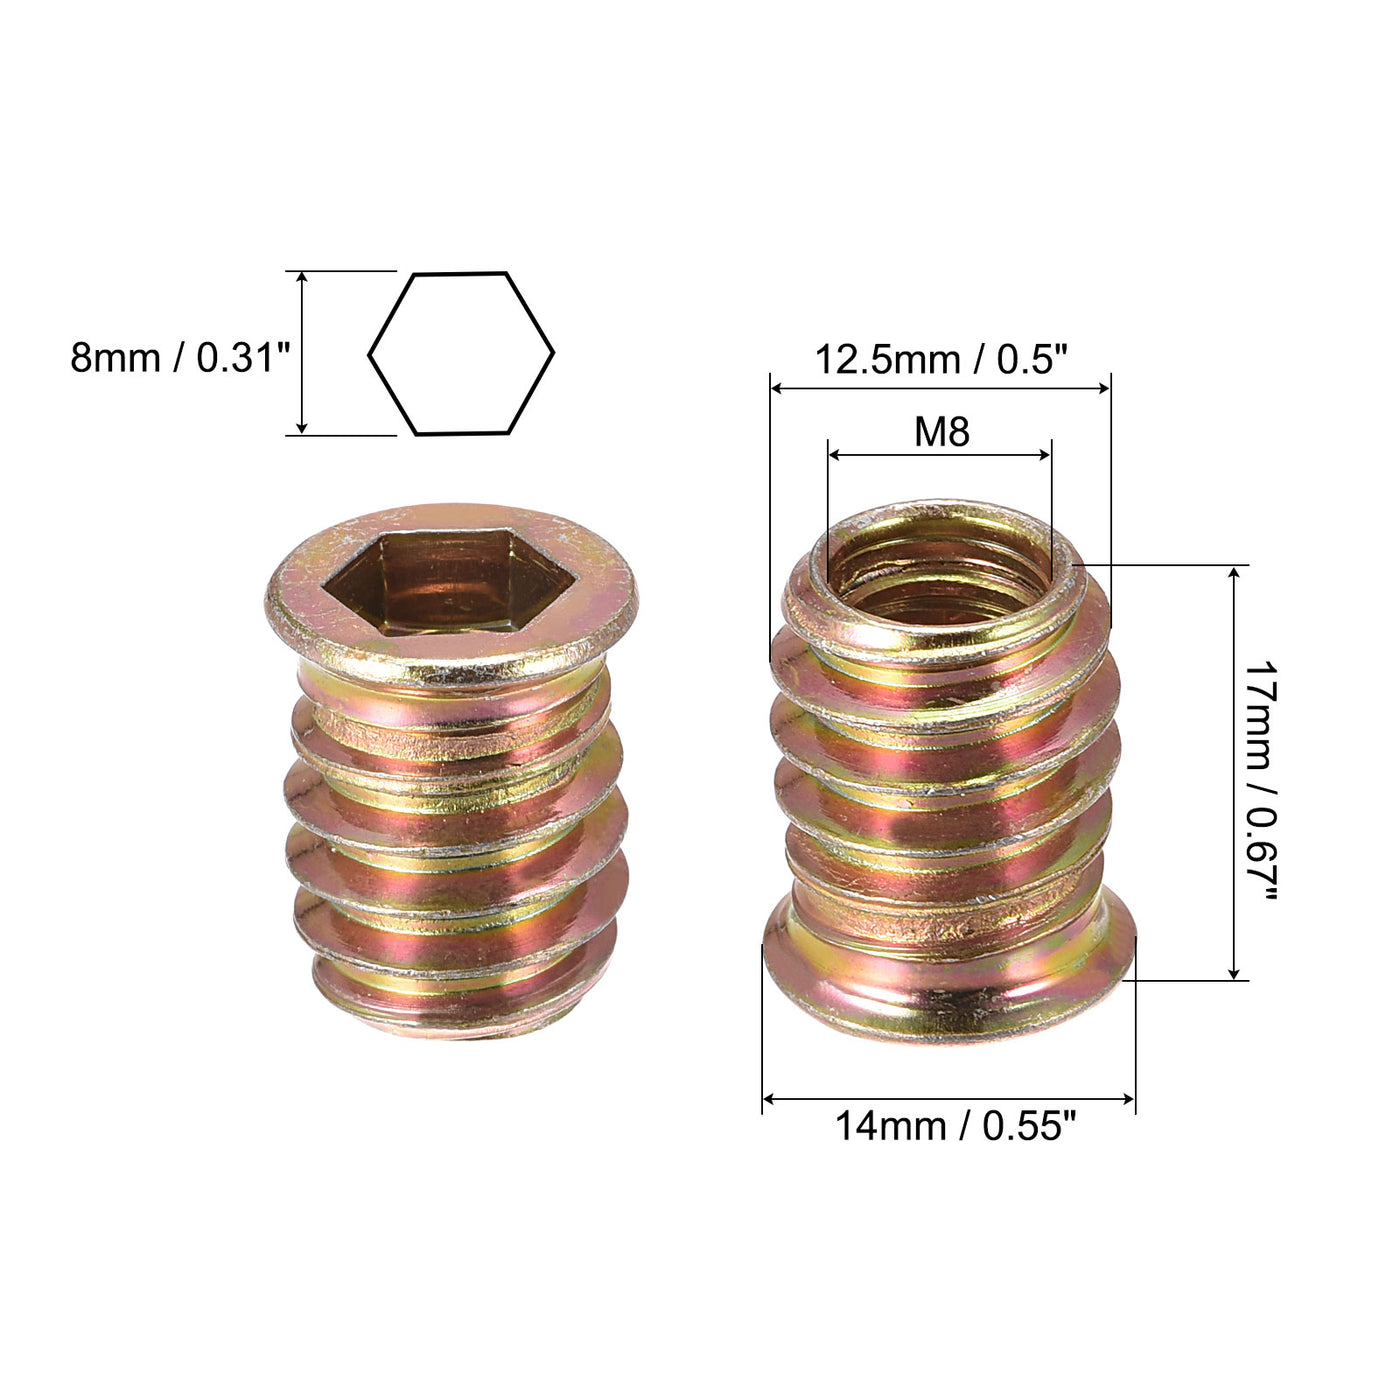 uxcell Uxcell M8x17mm Threaded Inserts for Wood Hex Socket Drive Furniture Screw-in Nut 120pcs